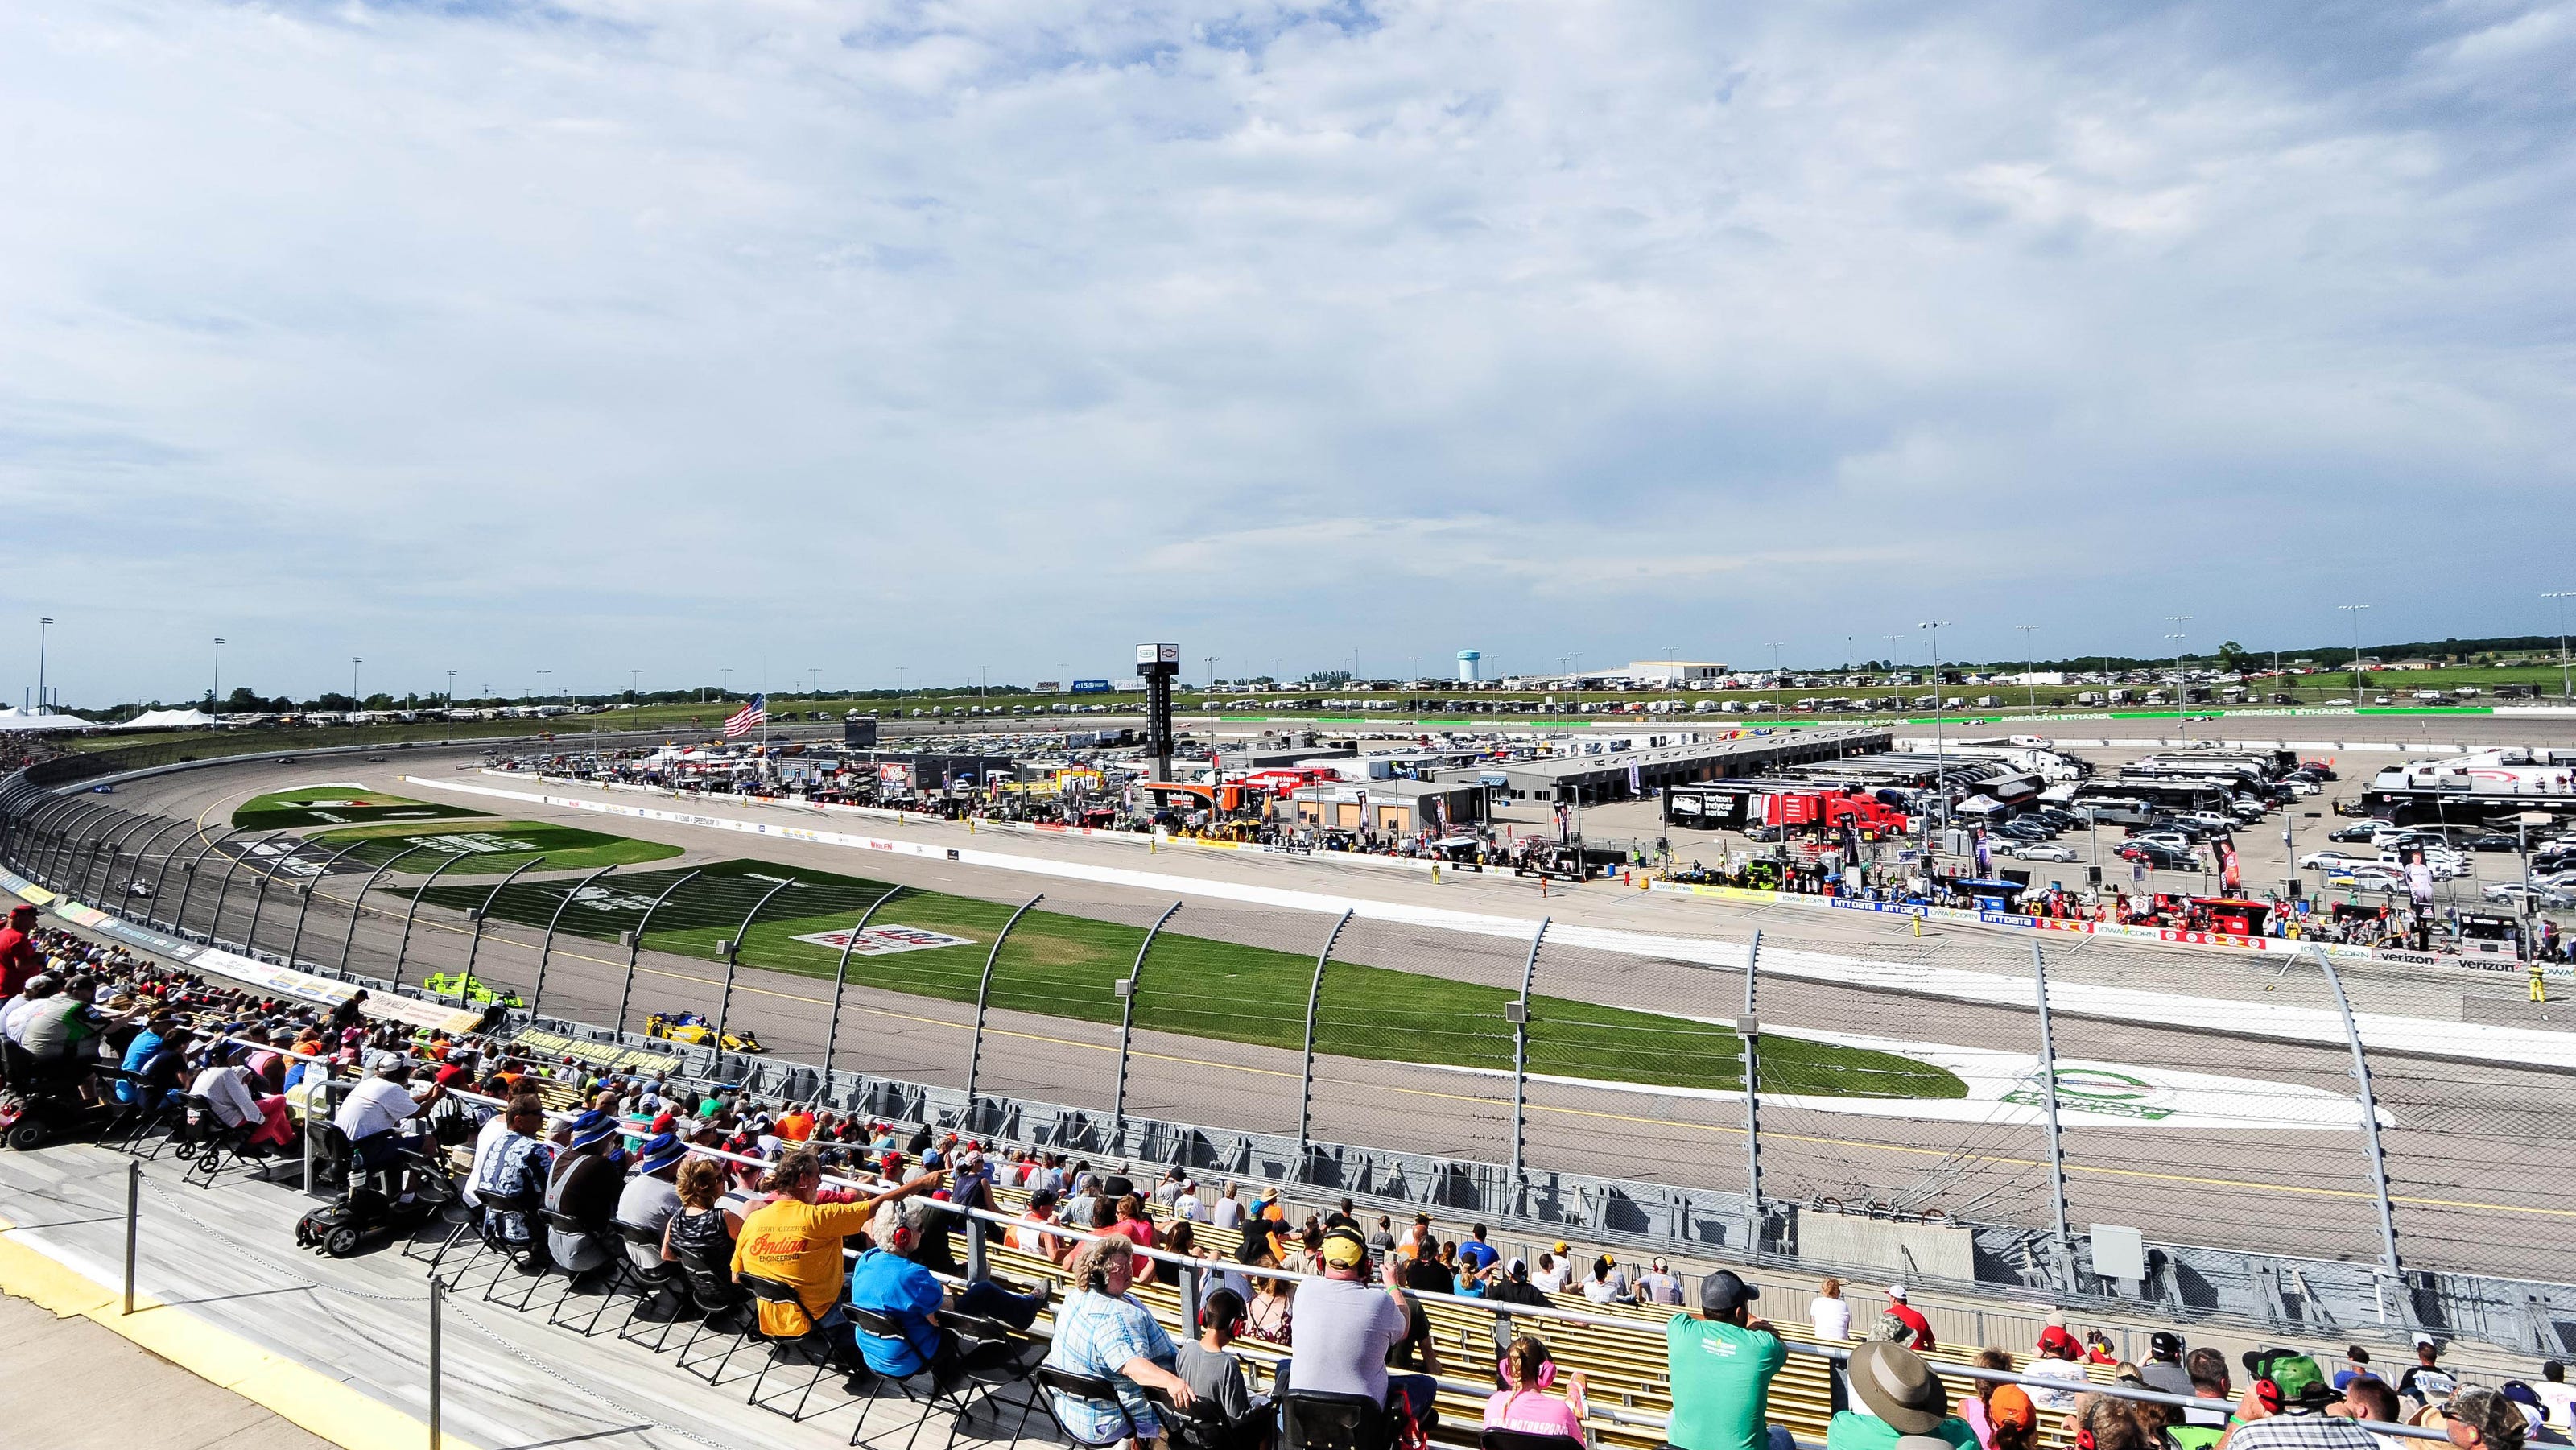 IndyCar event at Iowa Speedway will allow 'limited number' of fans